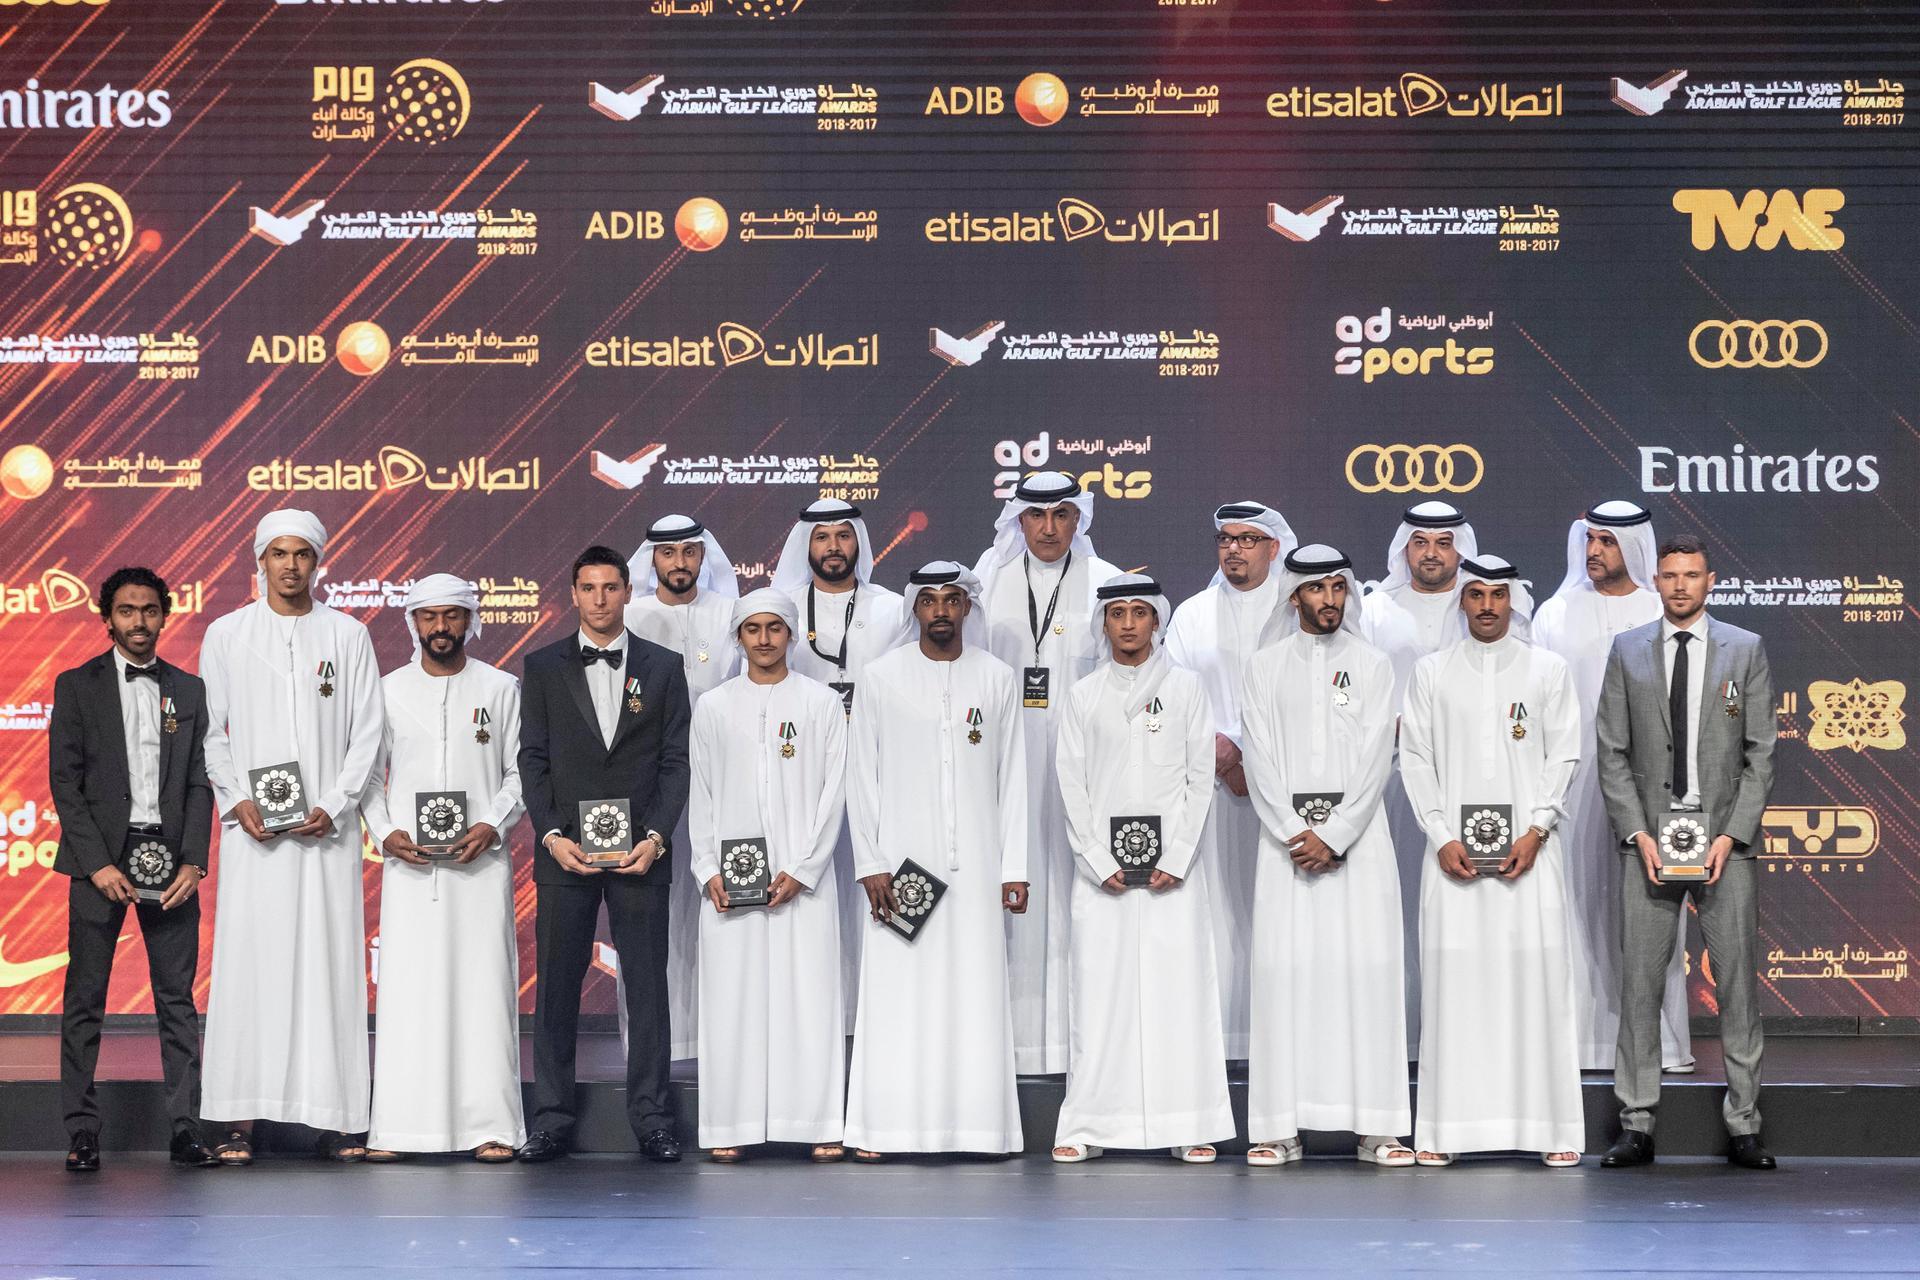 Omar Abdulrahman Extremely Pleased To Win Player Of The Year As Al Ain Dominate Arabian Gulf League Awards Night